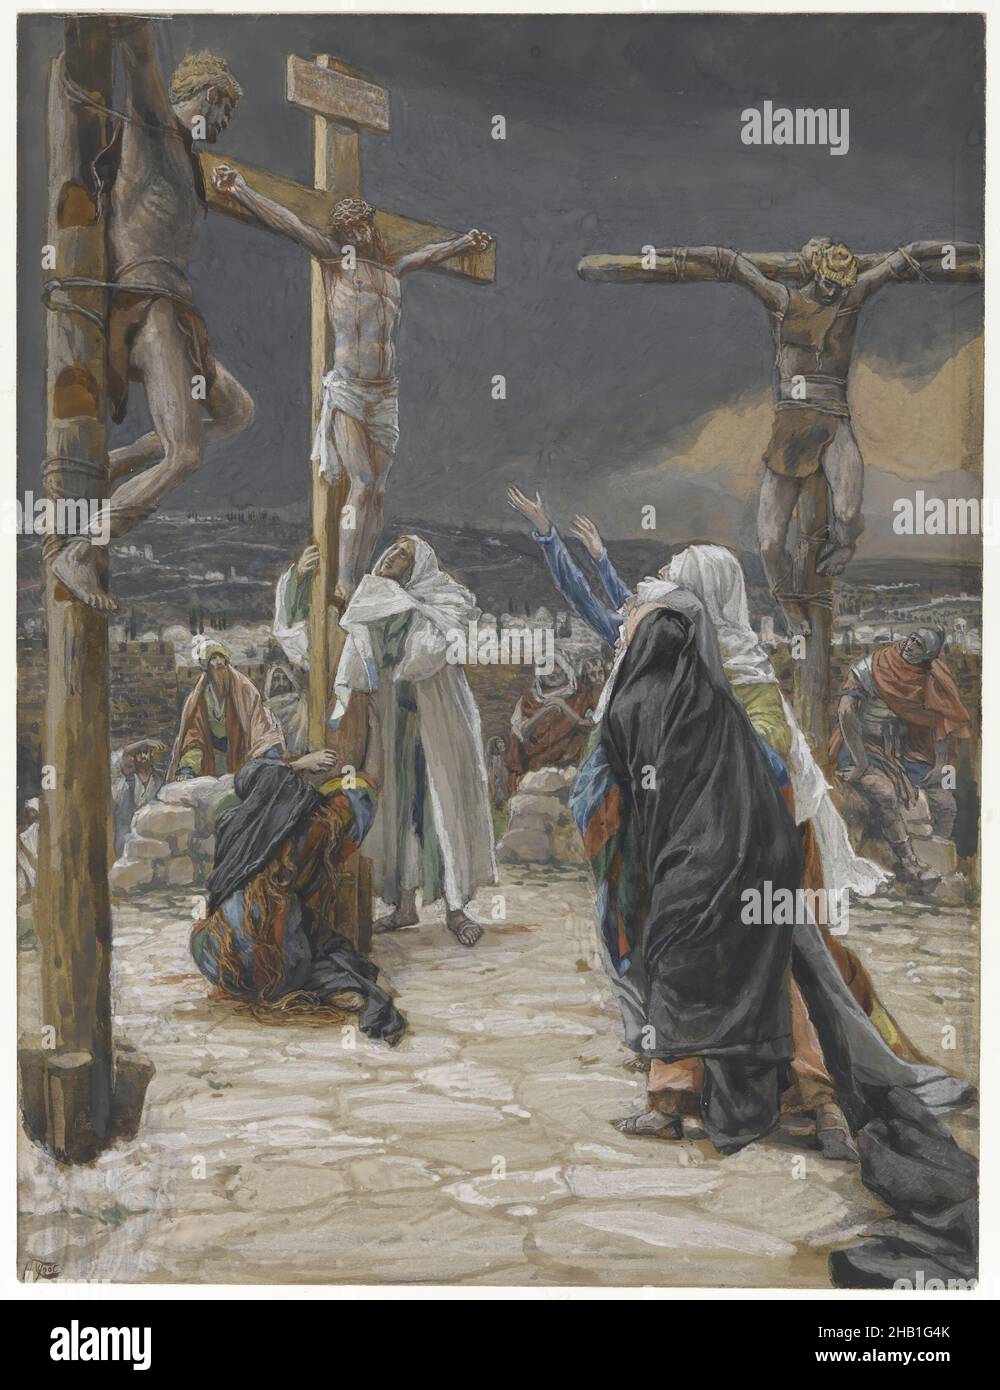 The Death of Jesus, La mort de Jésus, The Life of Our Lord Jesus Christ, La Vie de Notre-Seigneur Jésus-Christ, James Tissot, French, 1836-1902, Opaque watercolor over graphite on gray wove paper, France, 1886-1894, Image: 9 9/16 x 7 1/4 in., 24.3 x 18.4 cm, Bible, Calvary, chirstian, Christ, Christianity, cross, crucifix, crucifixion, crucify, death, Easter, french, french watercolor, god, Gospel Harmony, graphite, grief, James Tissot, Jesus, jesus christ, John 19:30, La mort, Life of Christ, Magdalene, Mary, new testament, pain, pray, religion, religious, religious art, sacrifice, suffering Stock Photo